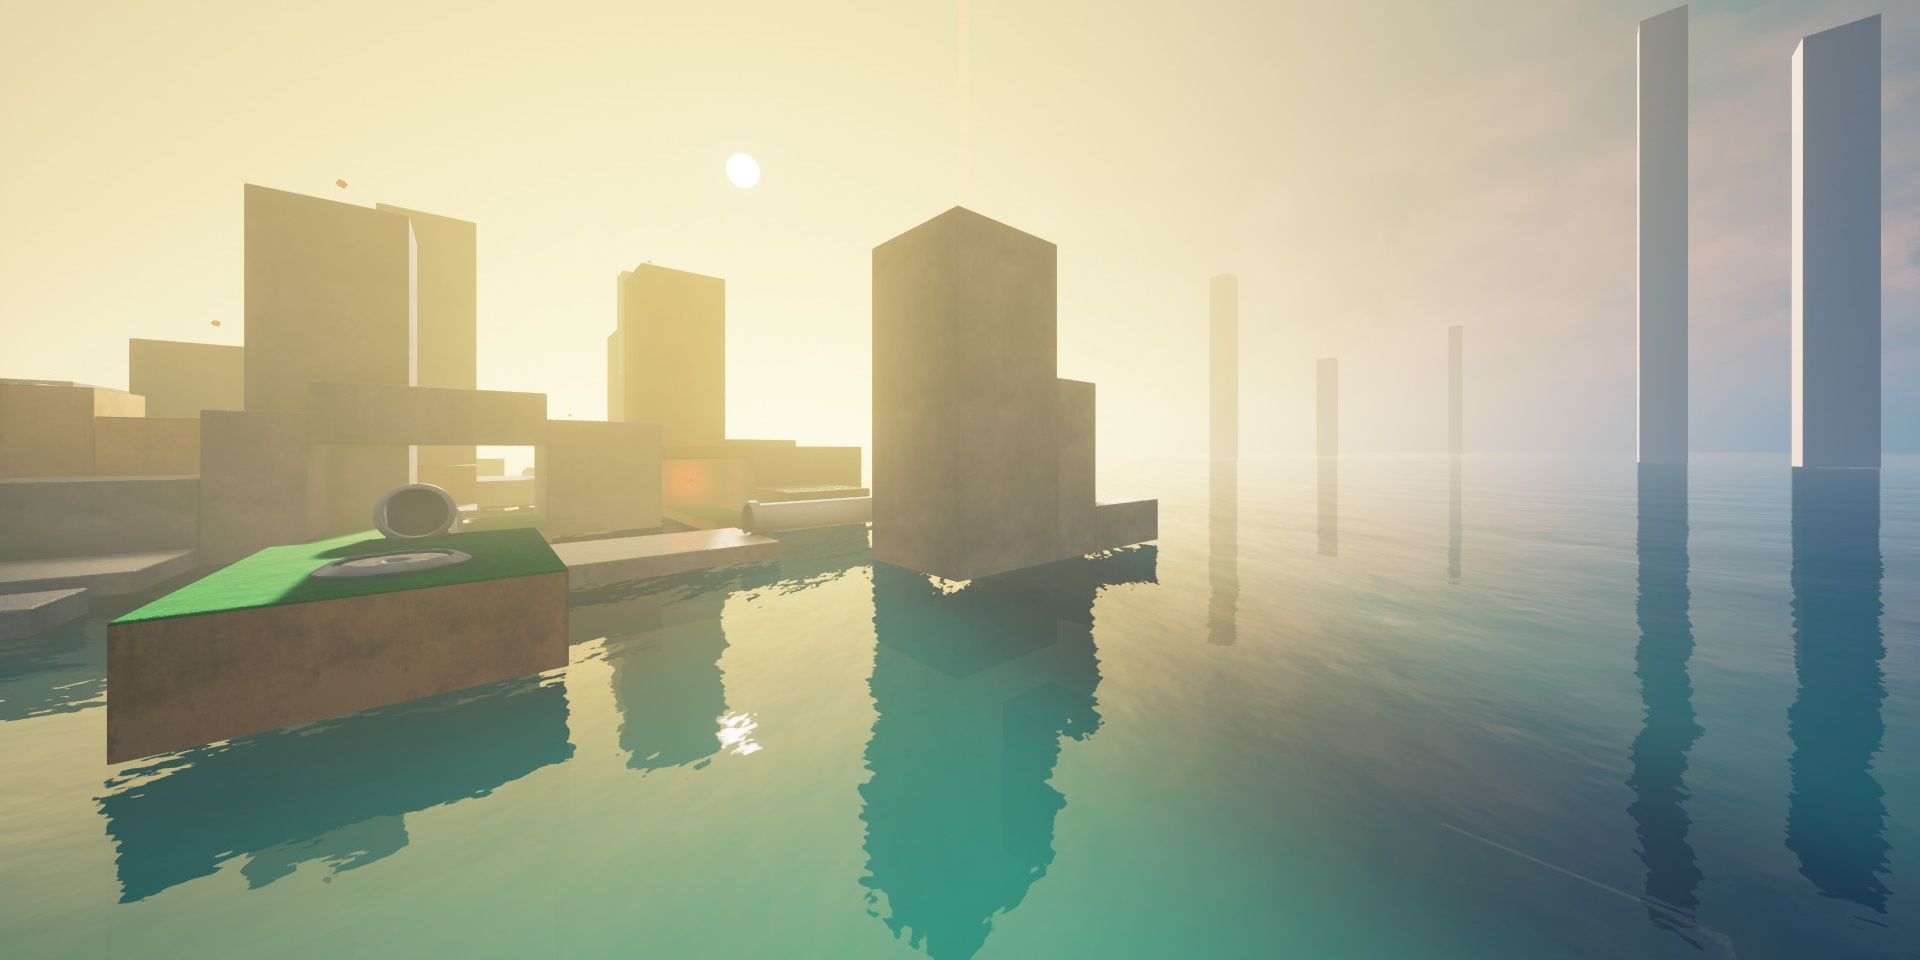 A level in Refunct showing platforms in the water